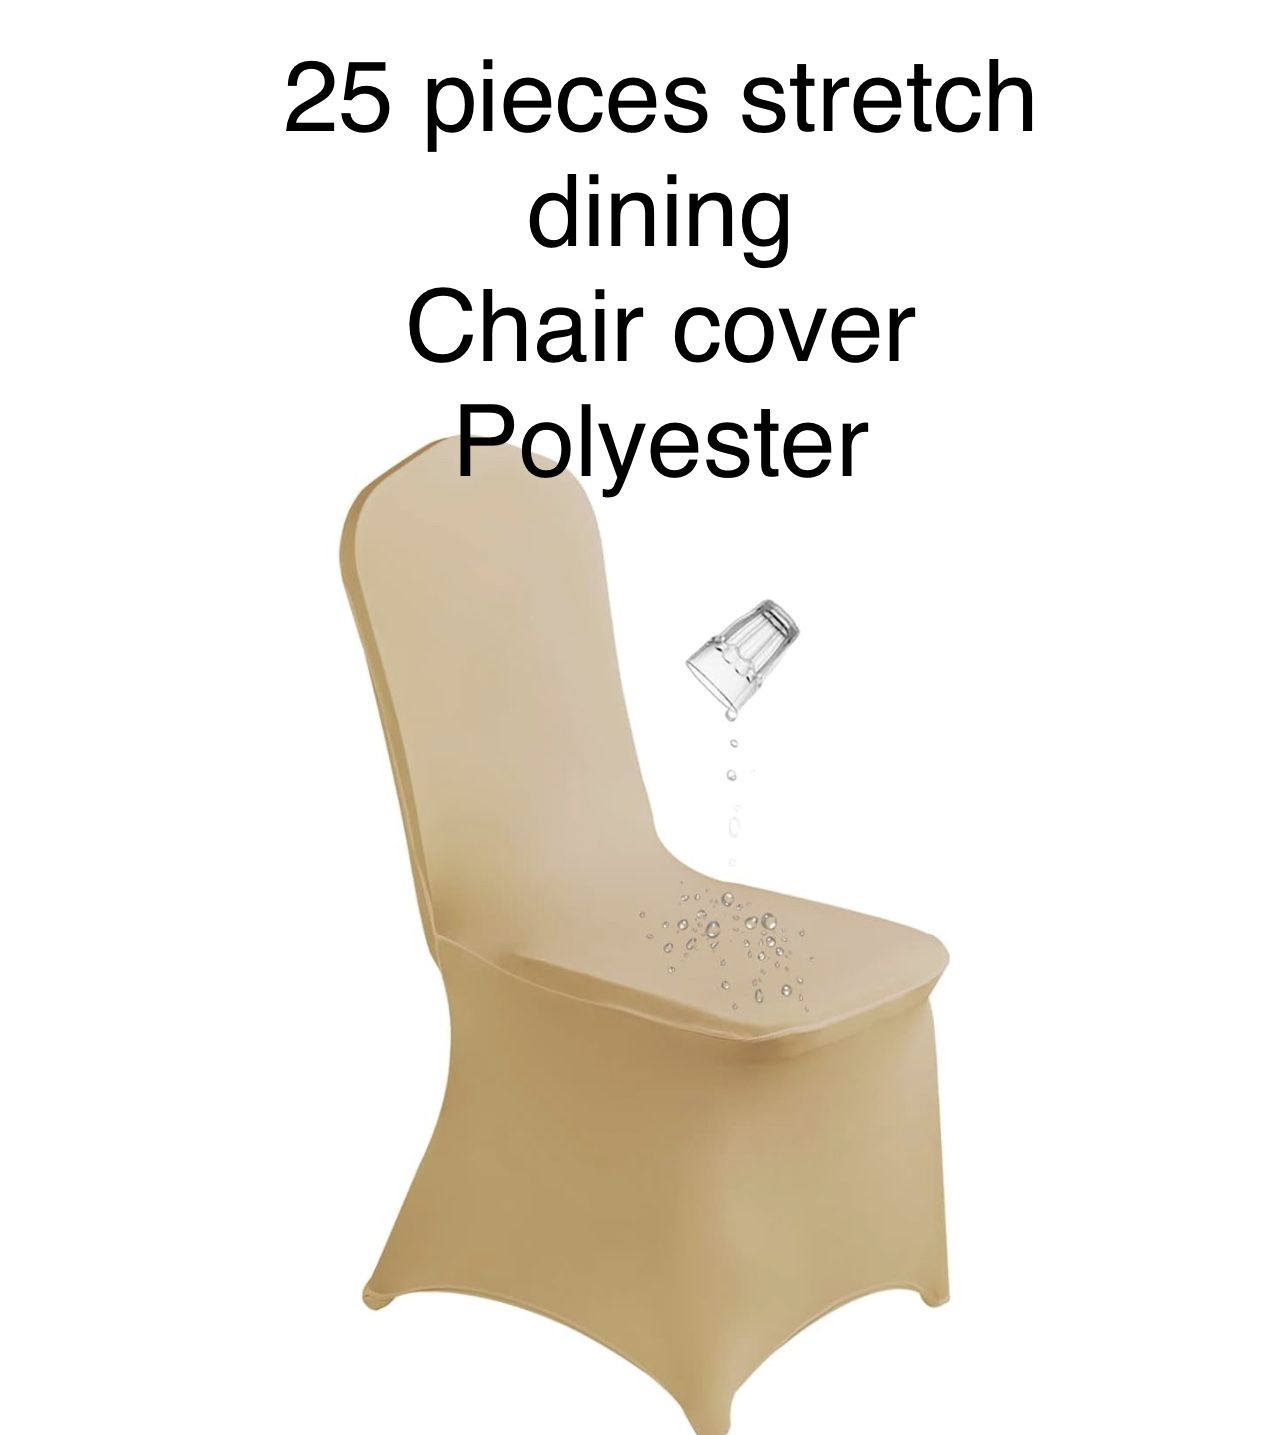 25 Pieces Stretch Dining Chair Cover 💯 Polyester 